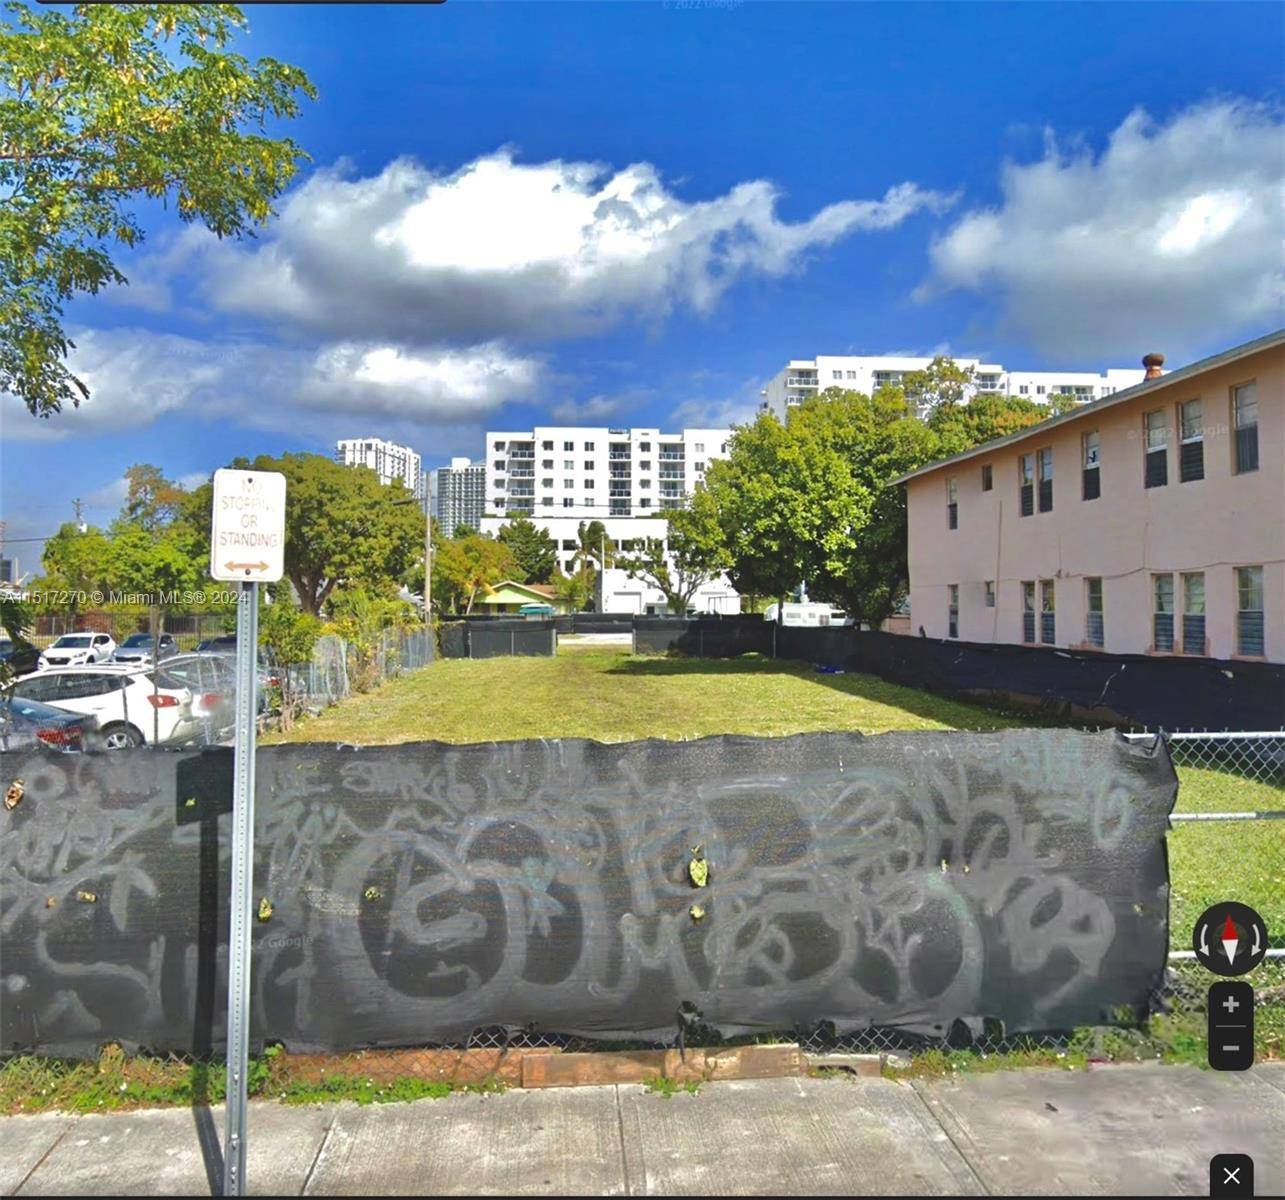 HEART OF EDGEWATER ONE BLK OF BISCAYNE BLVD, 7380 SQ FT LAND, ADJACENT TO 2 LOTS 130 138, TOTAL 21, 980 SQ FT.